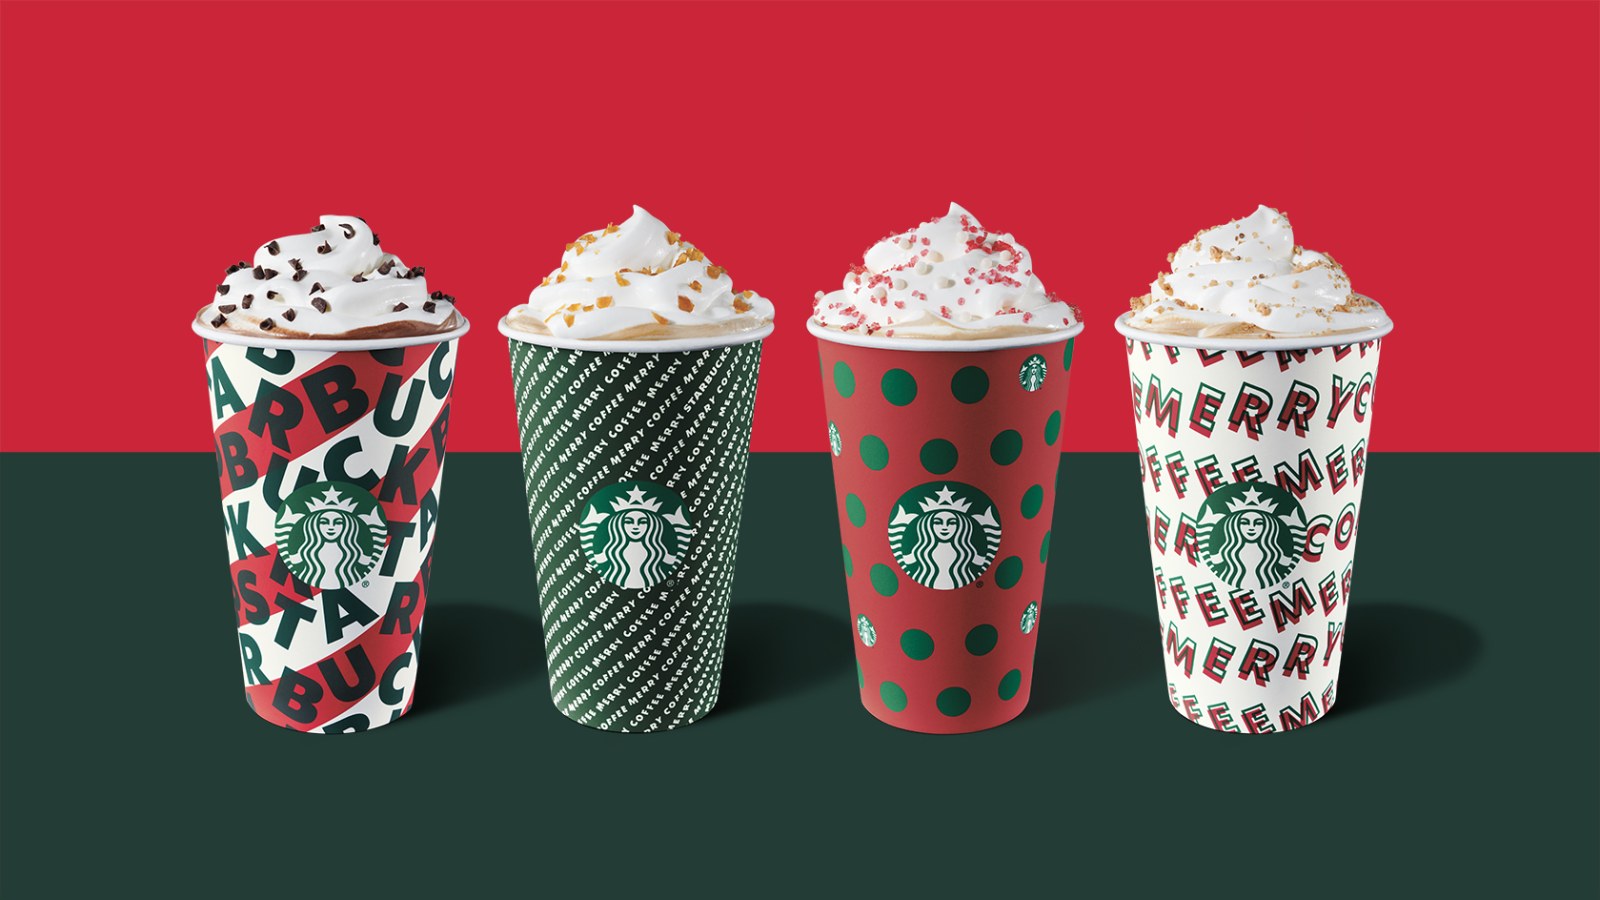 Starbucks Red Cups 2019: What Christmas Holiday Drinks are